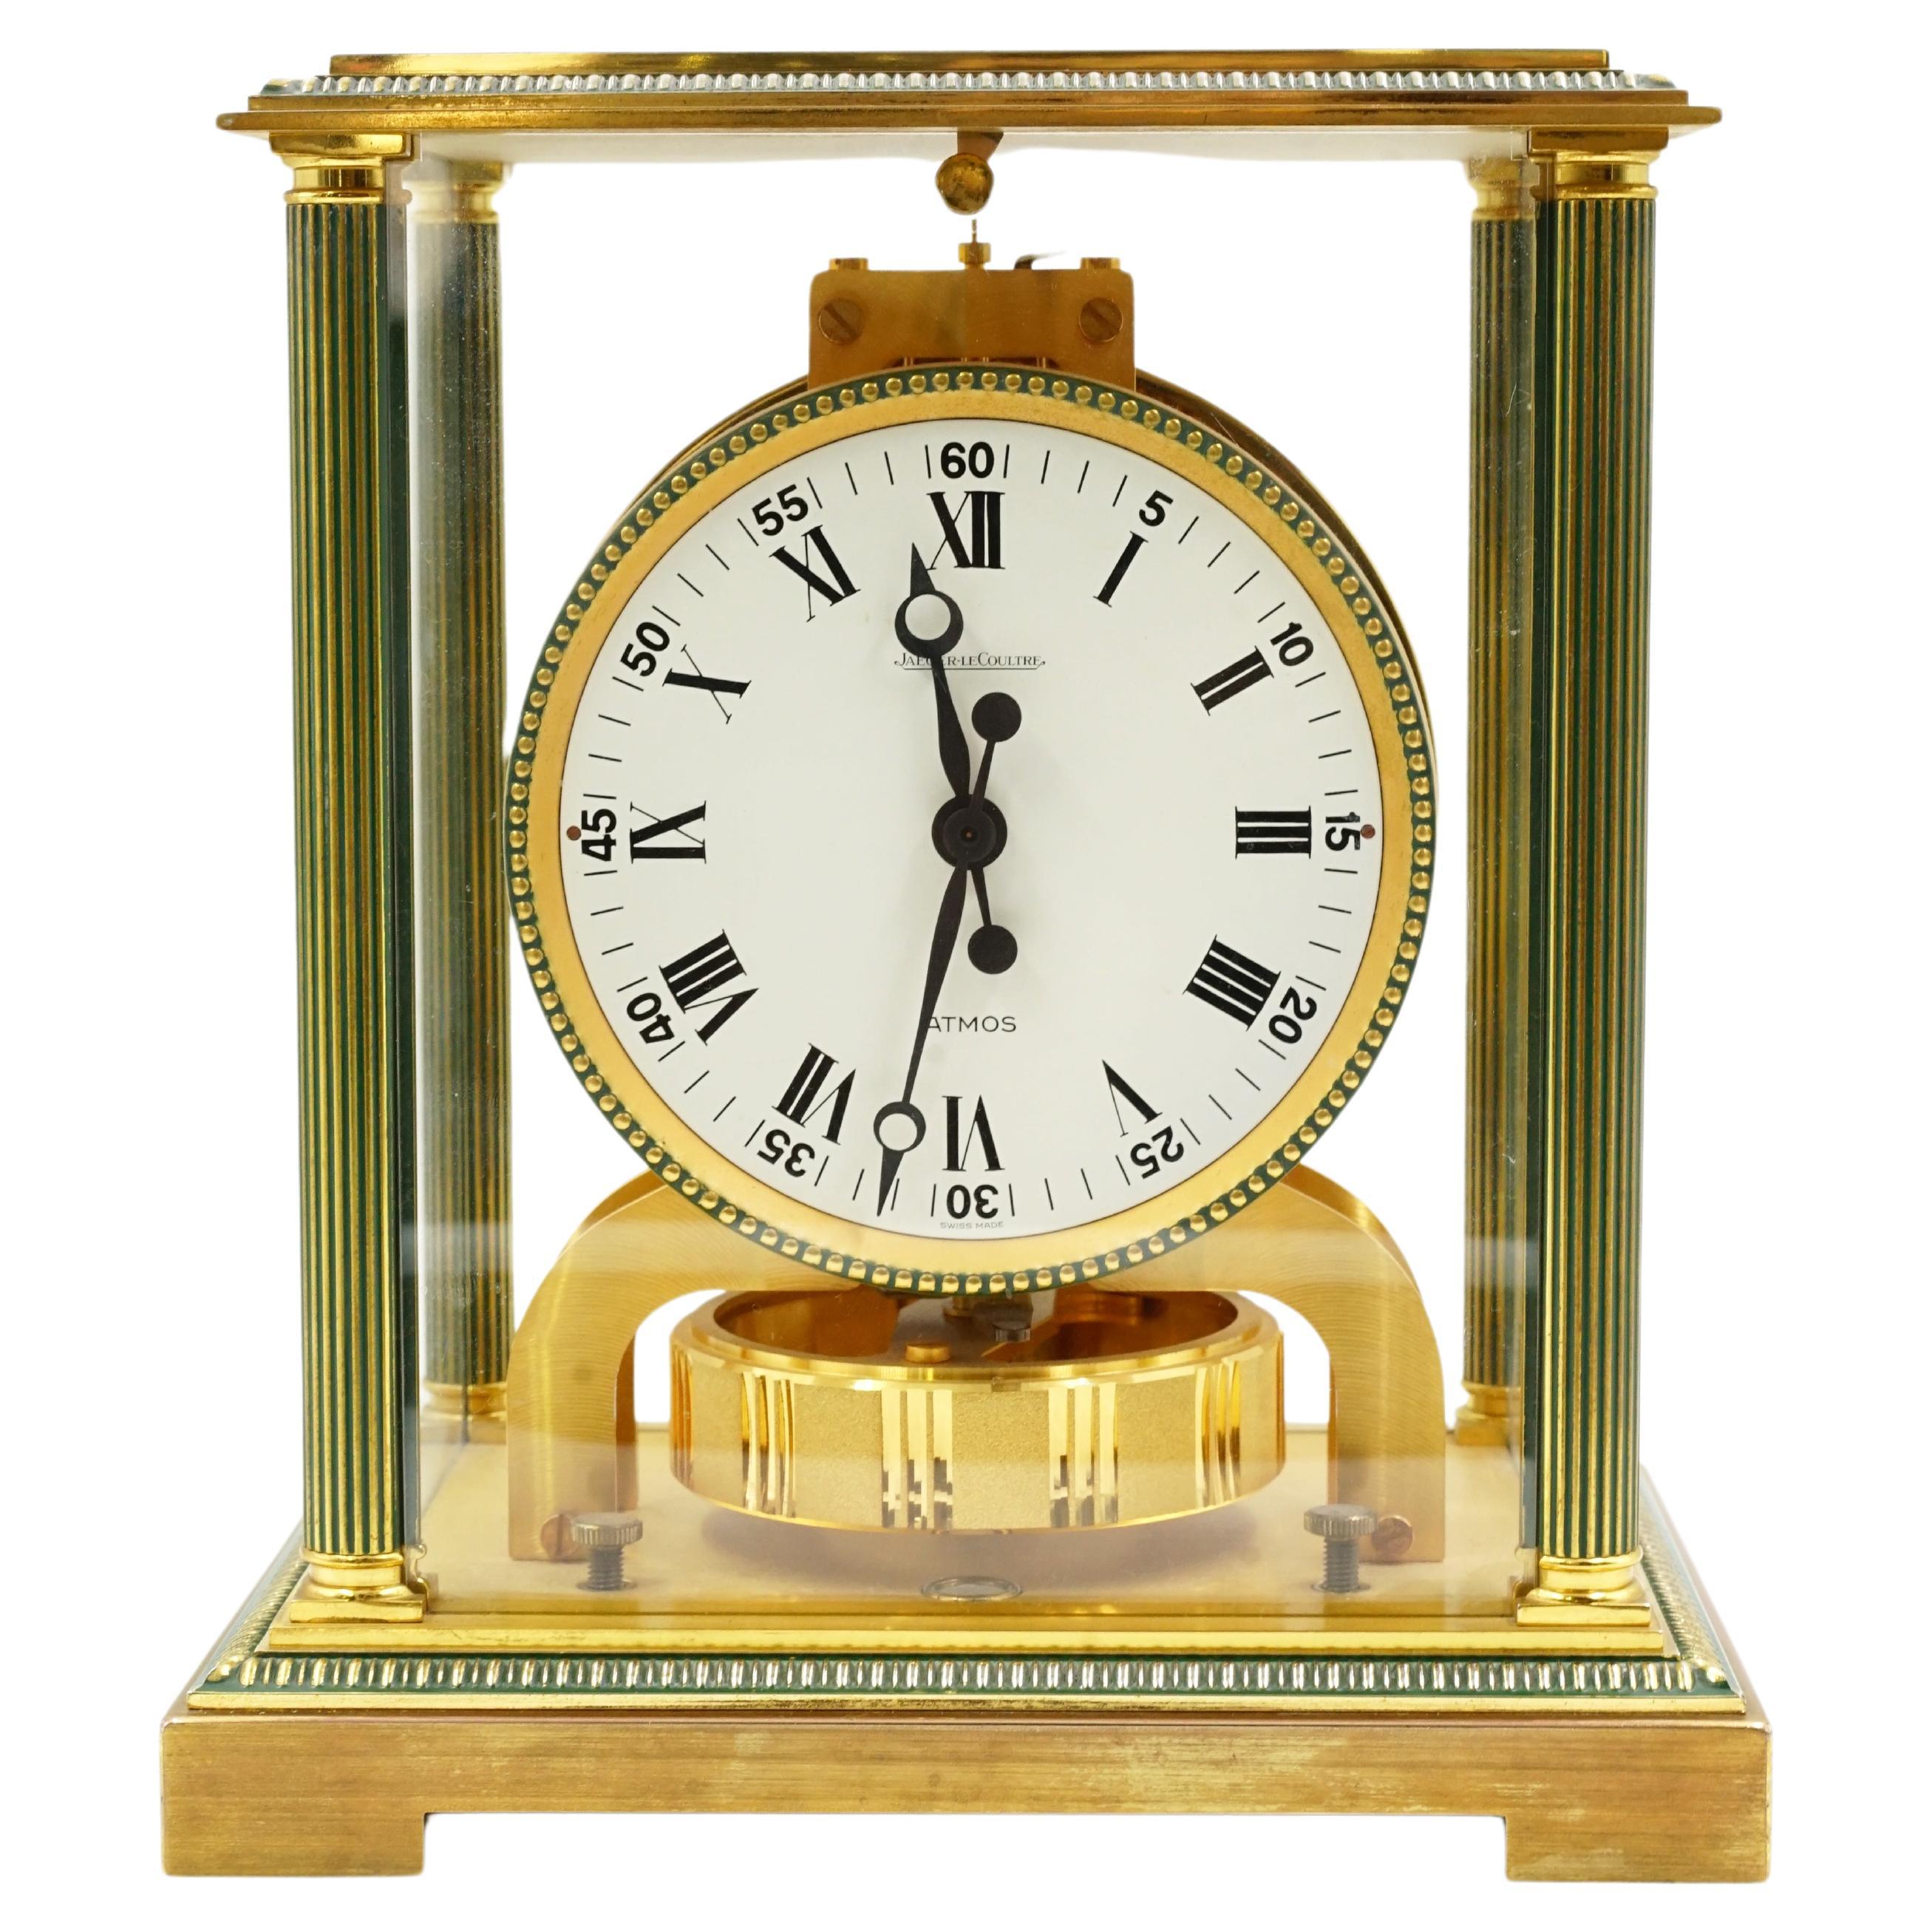 Jaeguer Le coultre Atmos table clock
Atmos Model Directory Style
Origin Switzerland Circa 1970
Excellent condition. minimal natural wear due to its age
Works correctly
Materials Gilded bronze and its columns are painted with green enamel.
white dial